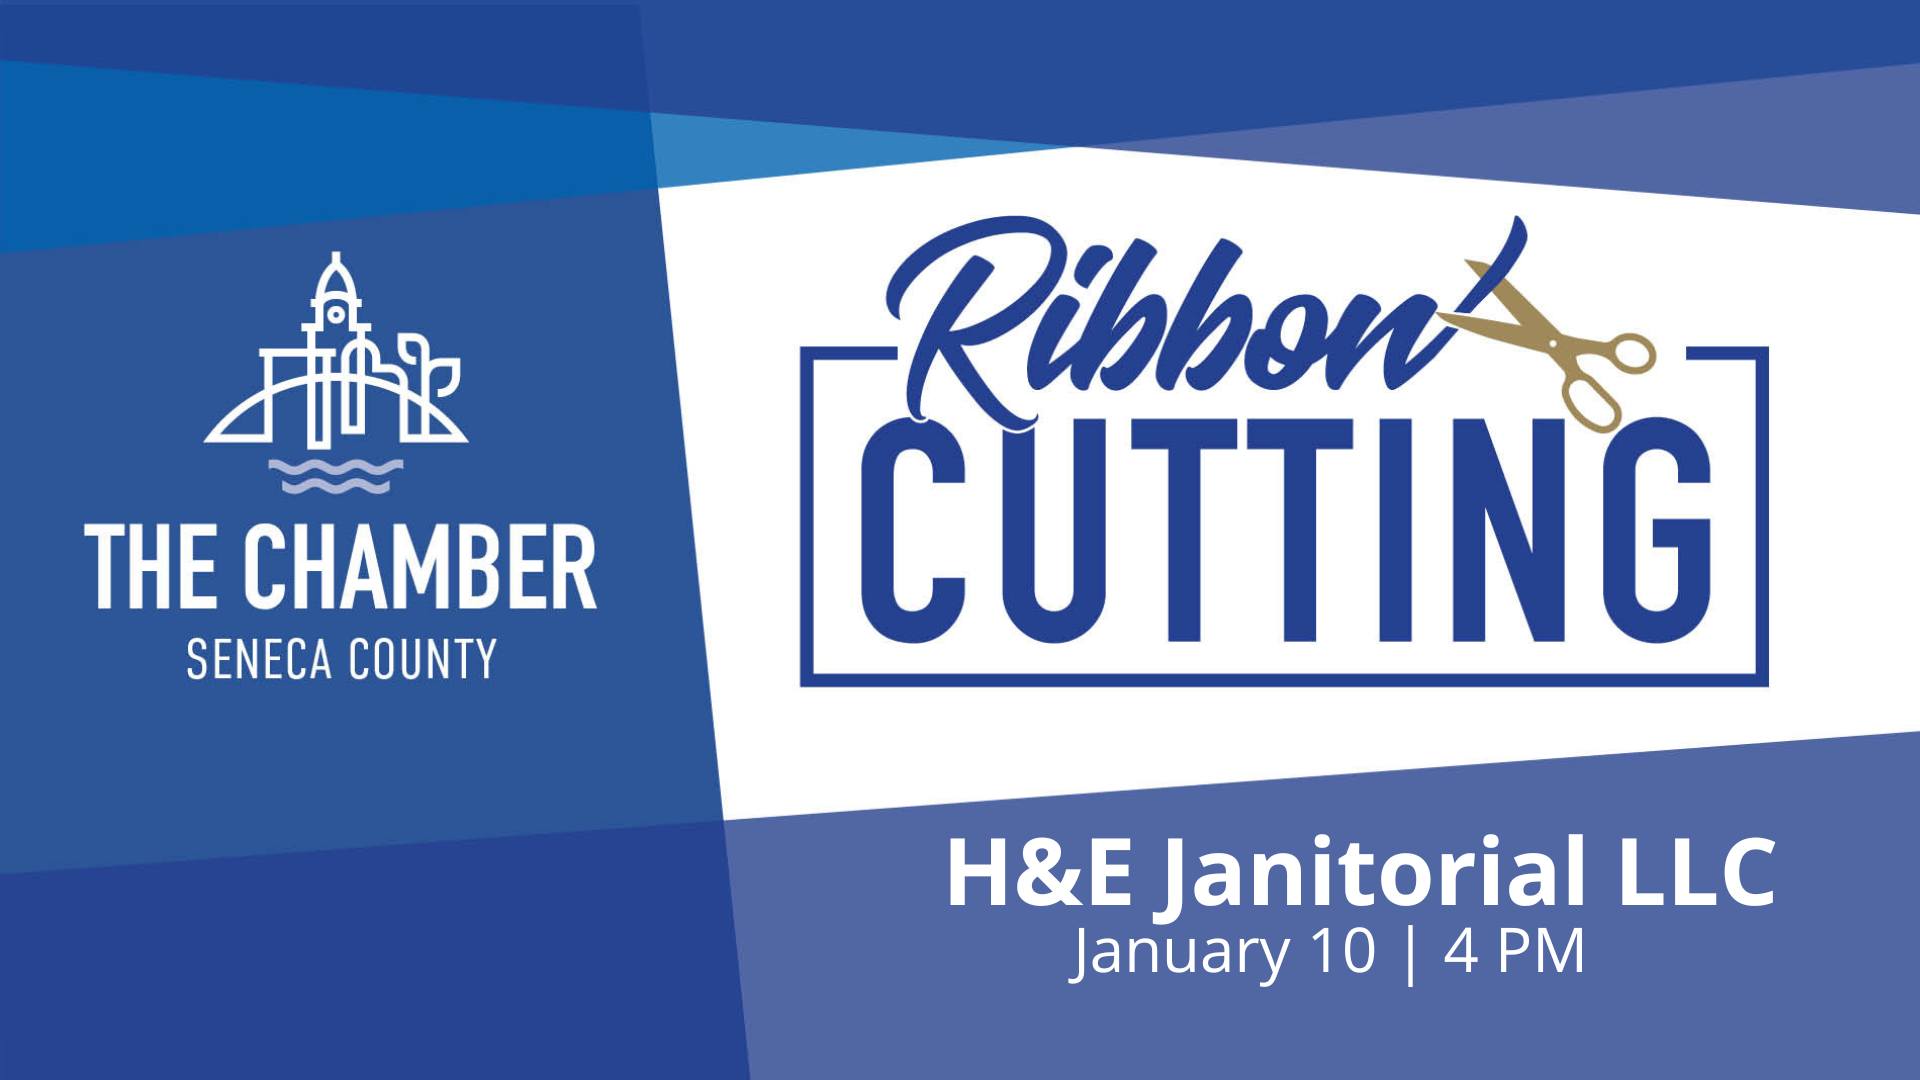 H&E Janitorial LLC to Host Ribbon Cutting